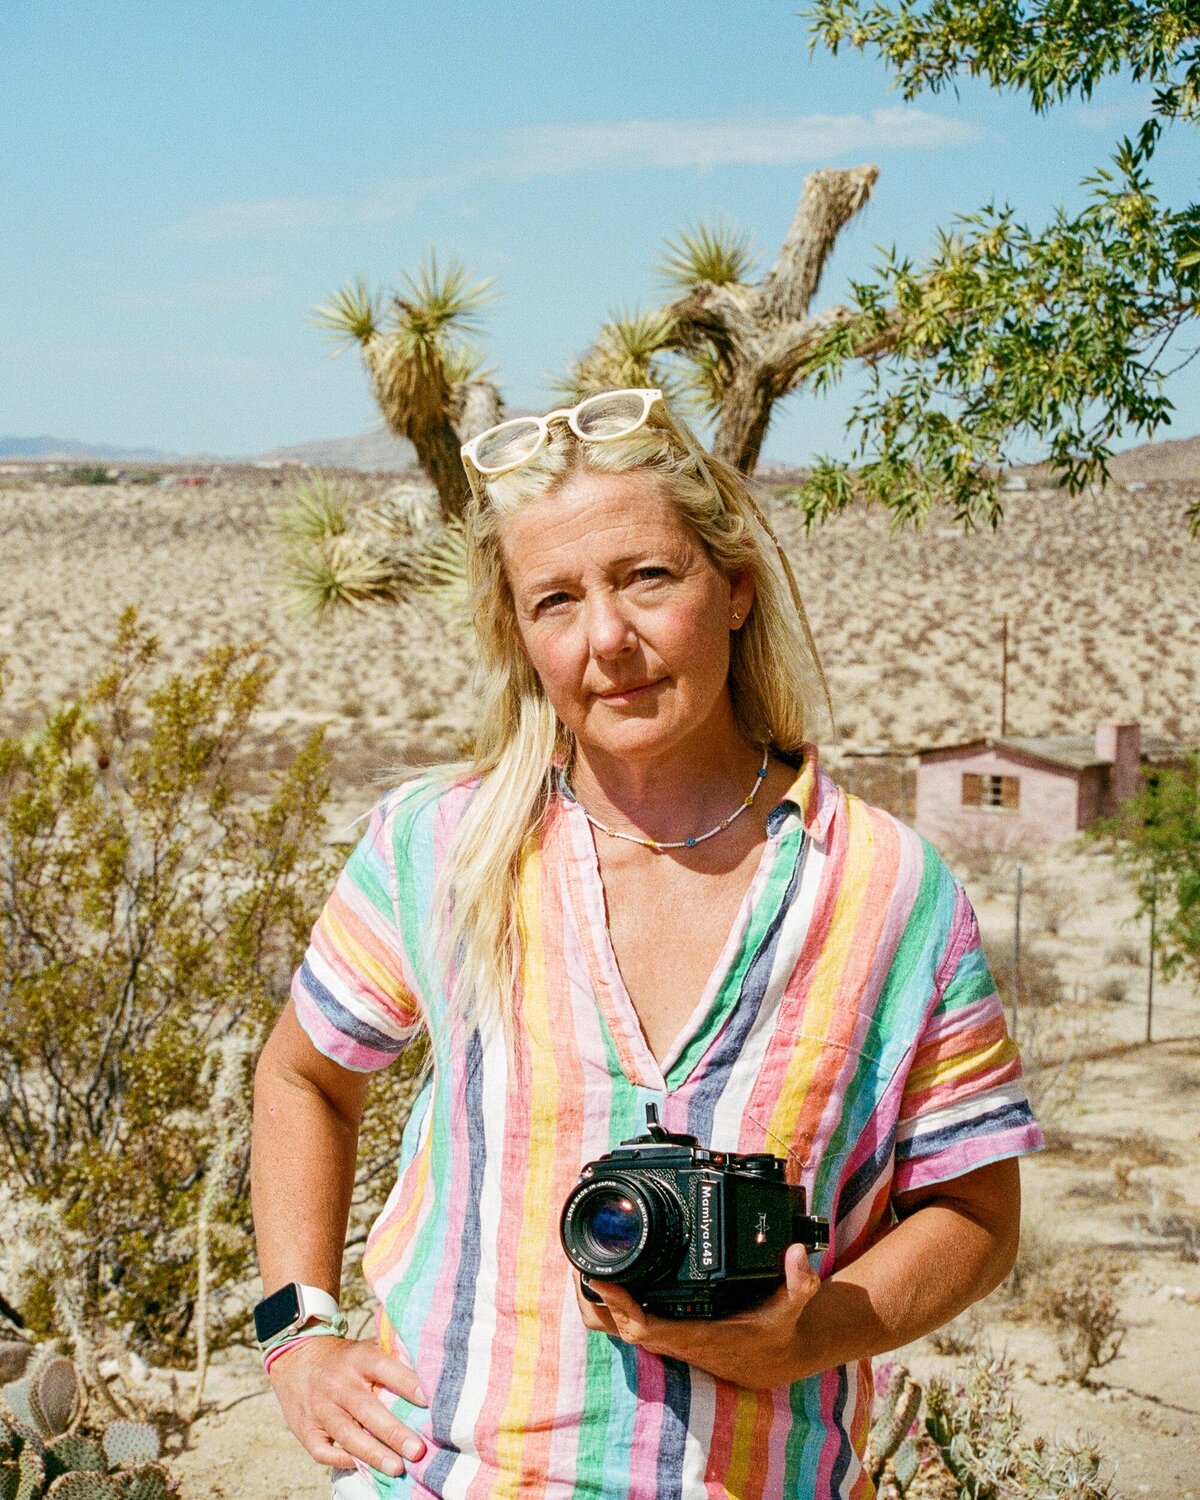 Woman holds her camera and gazes at the photographer with desert landscape in the background